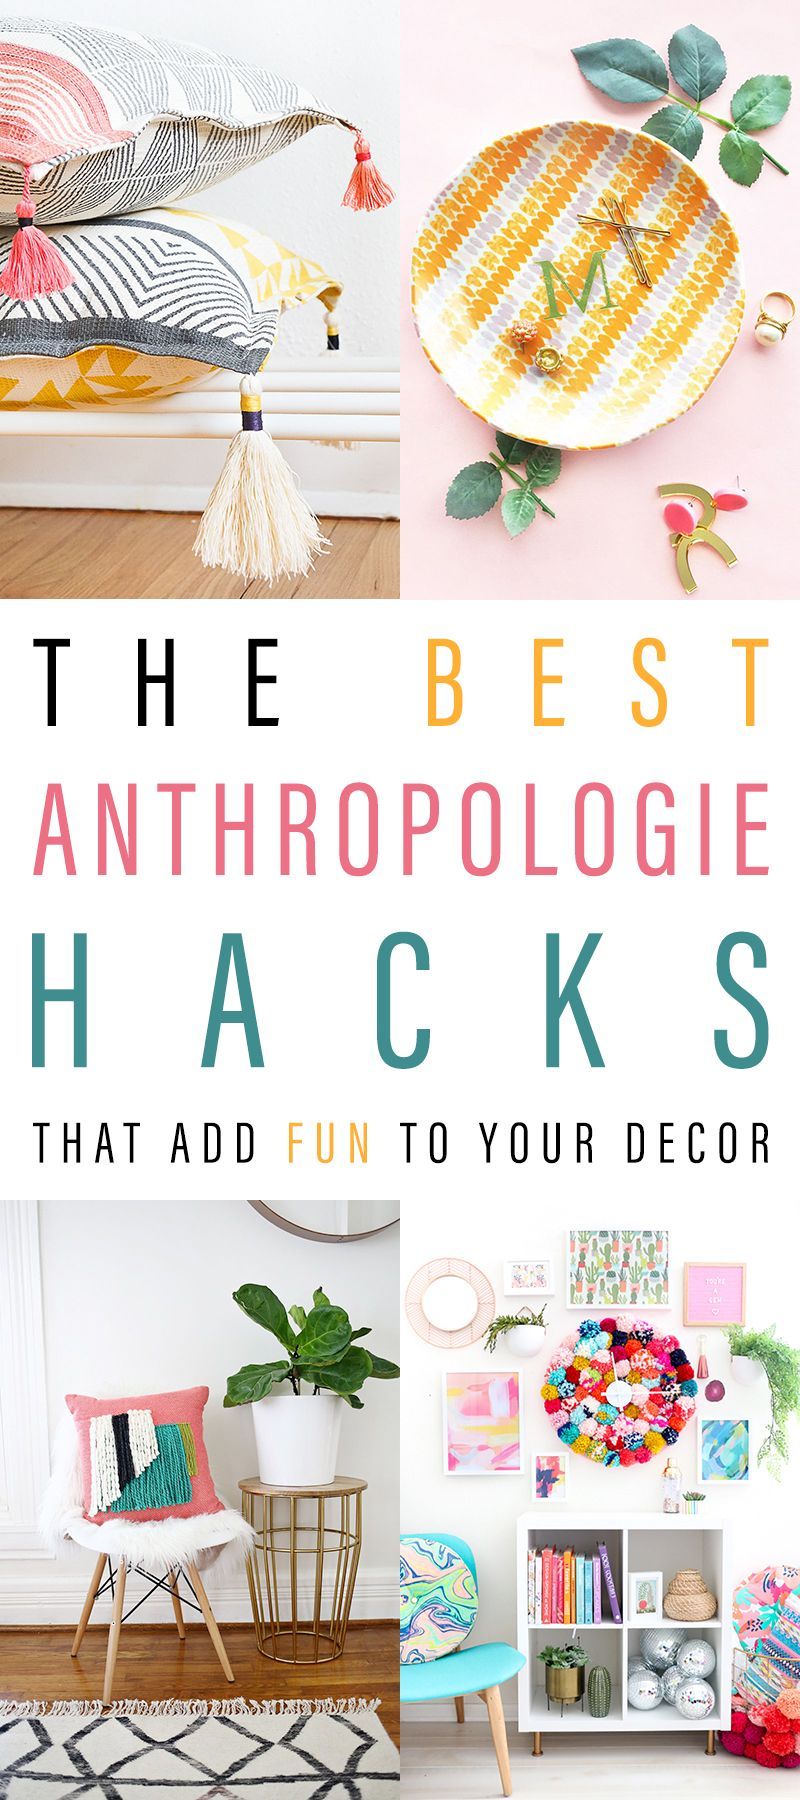 The Best Anthropologie Hacks That Add Fun To Your Decor -   15 diy projects For The Home hacks ideas